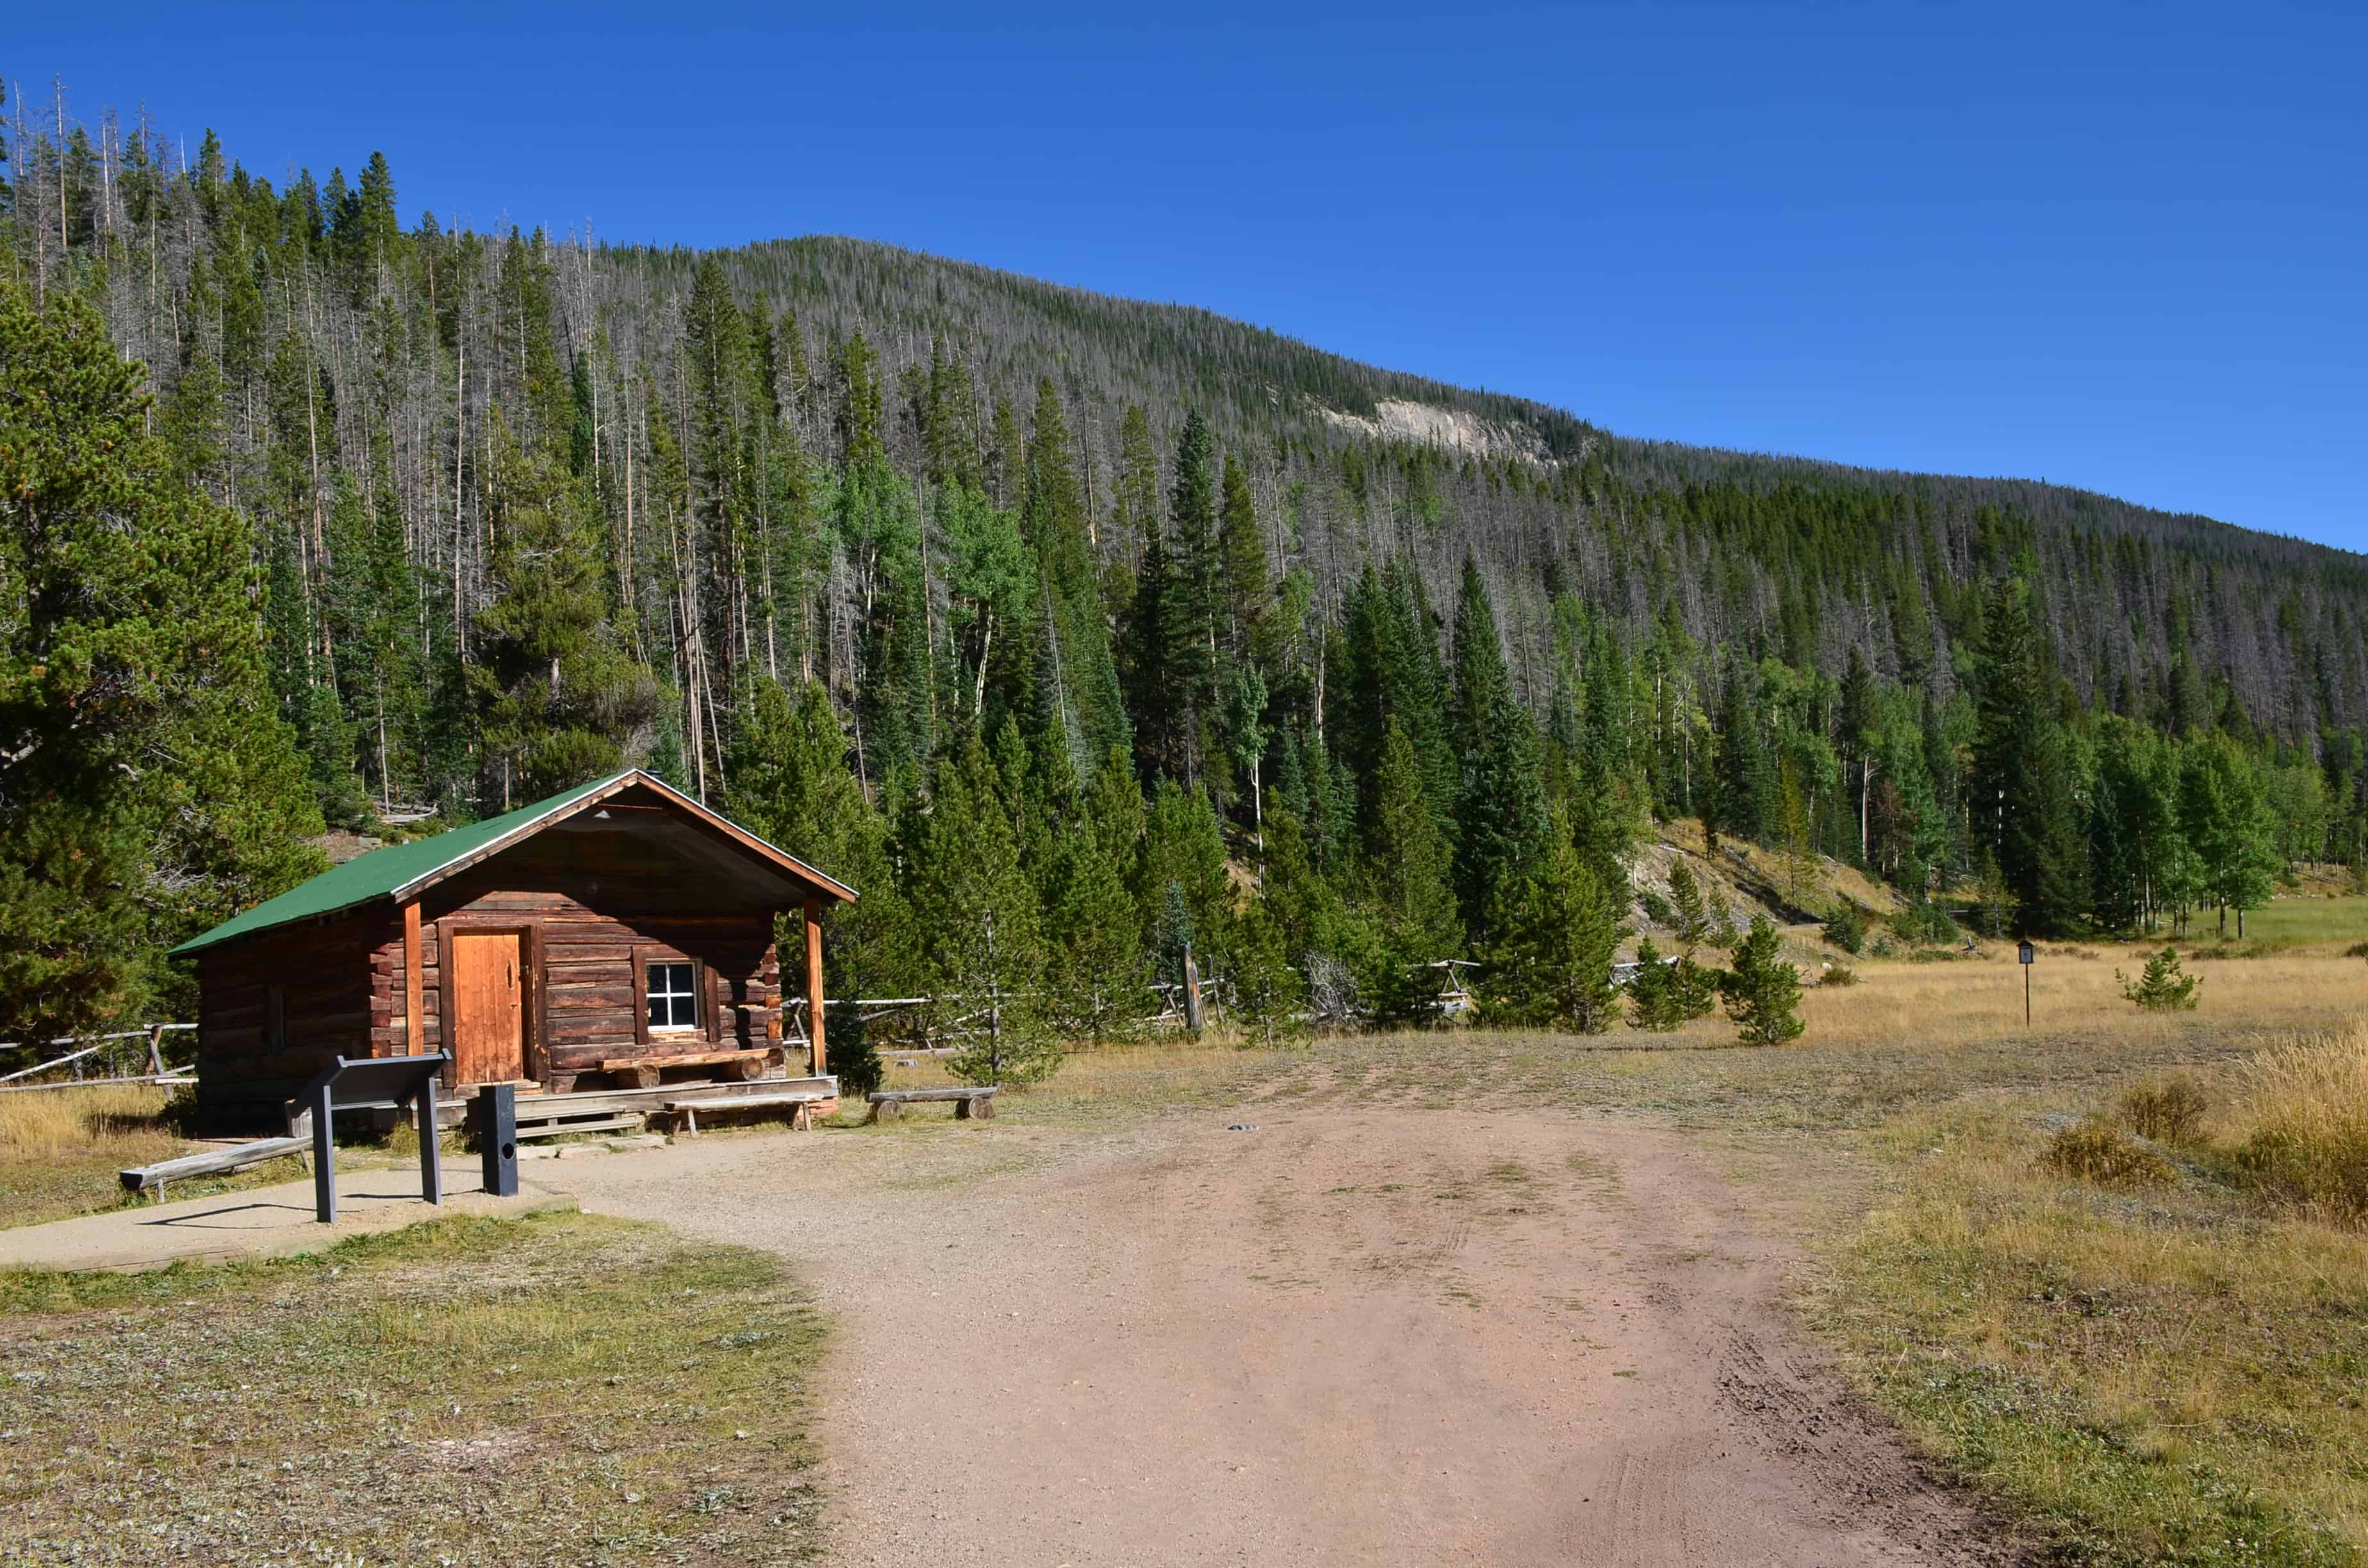 Fleshuts Cabin at Holzwarth Historic Site on Trail Ridge Road in Rocky Mountain National Park, Colorado